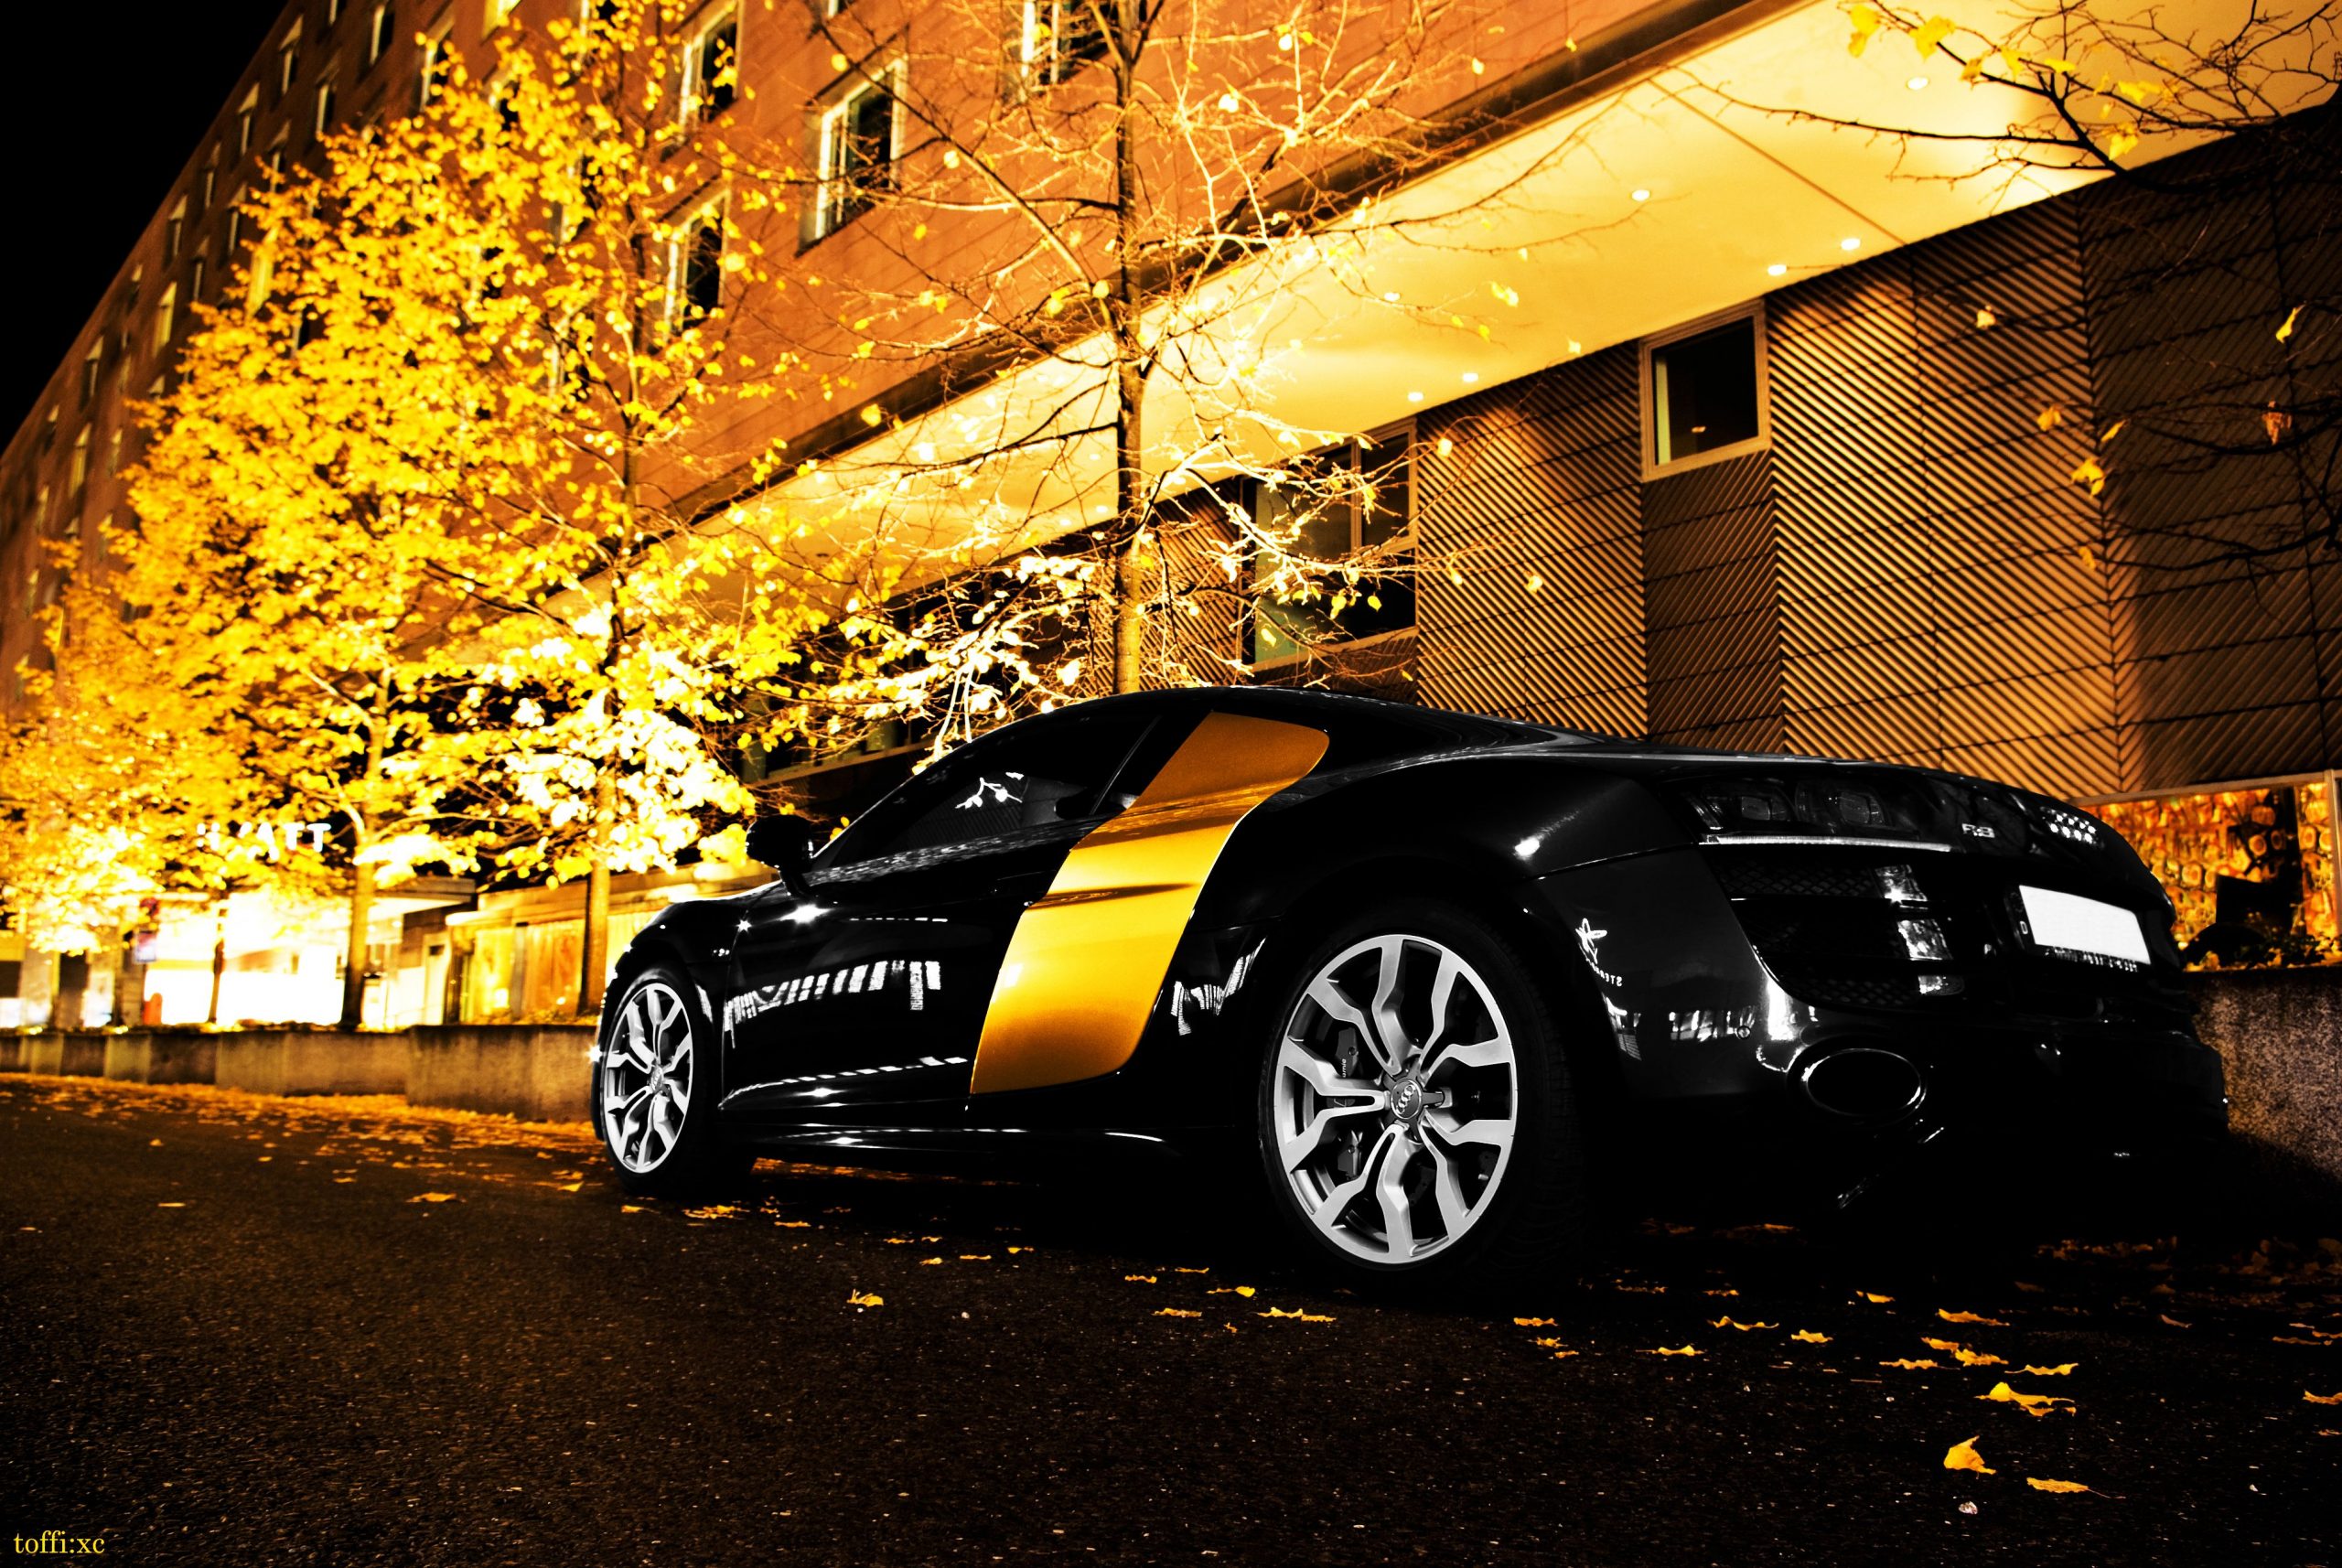 Black and Gold Car Wallpapers HD Free download 